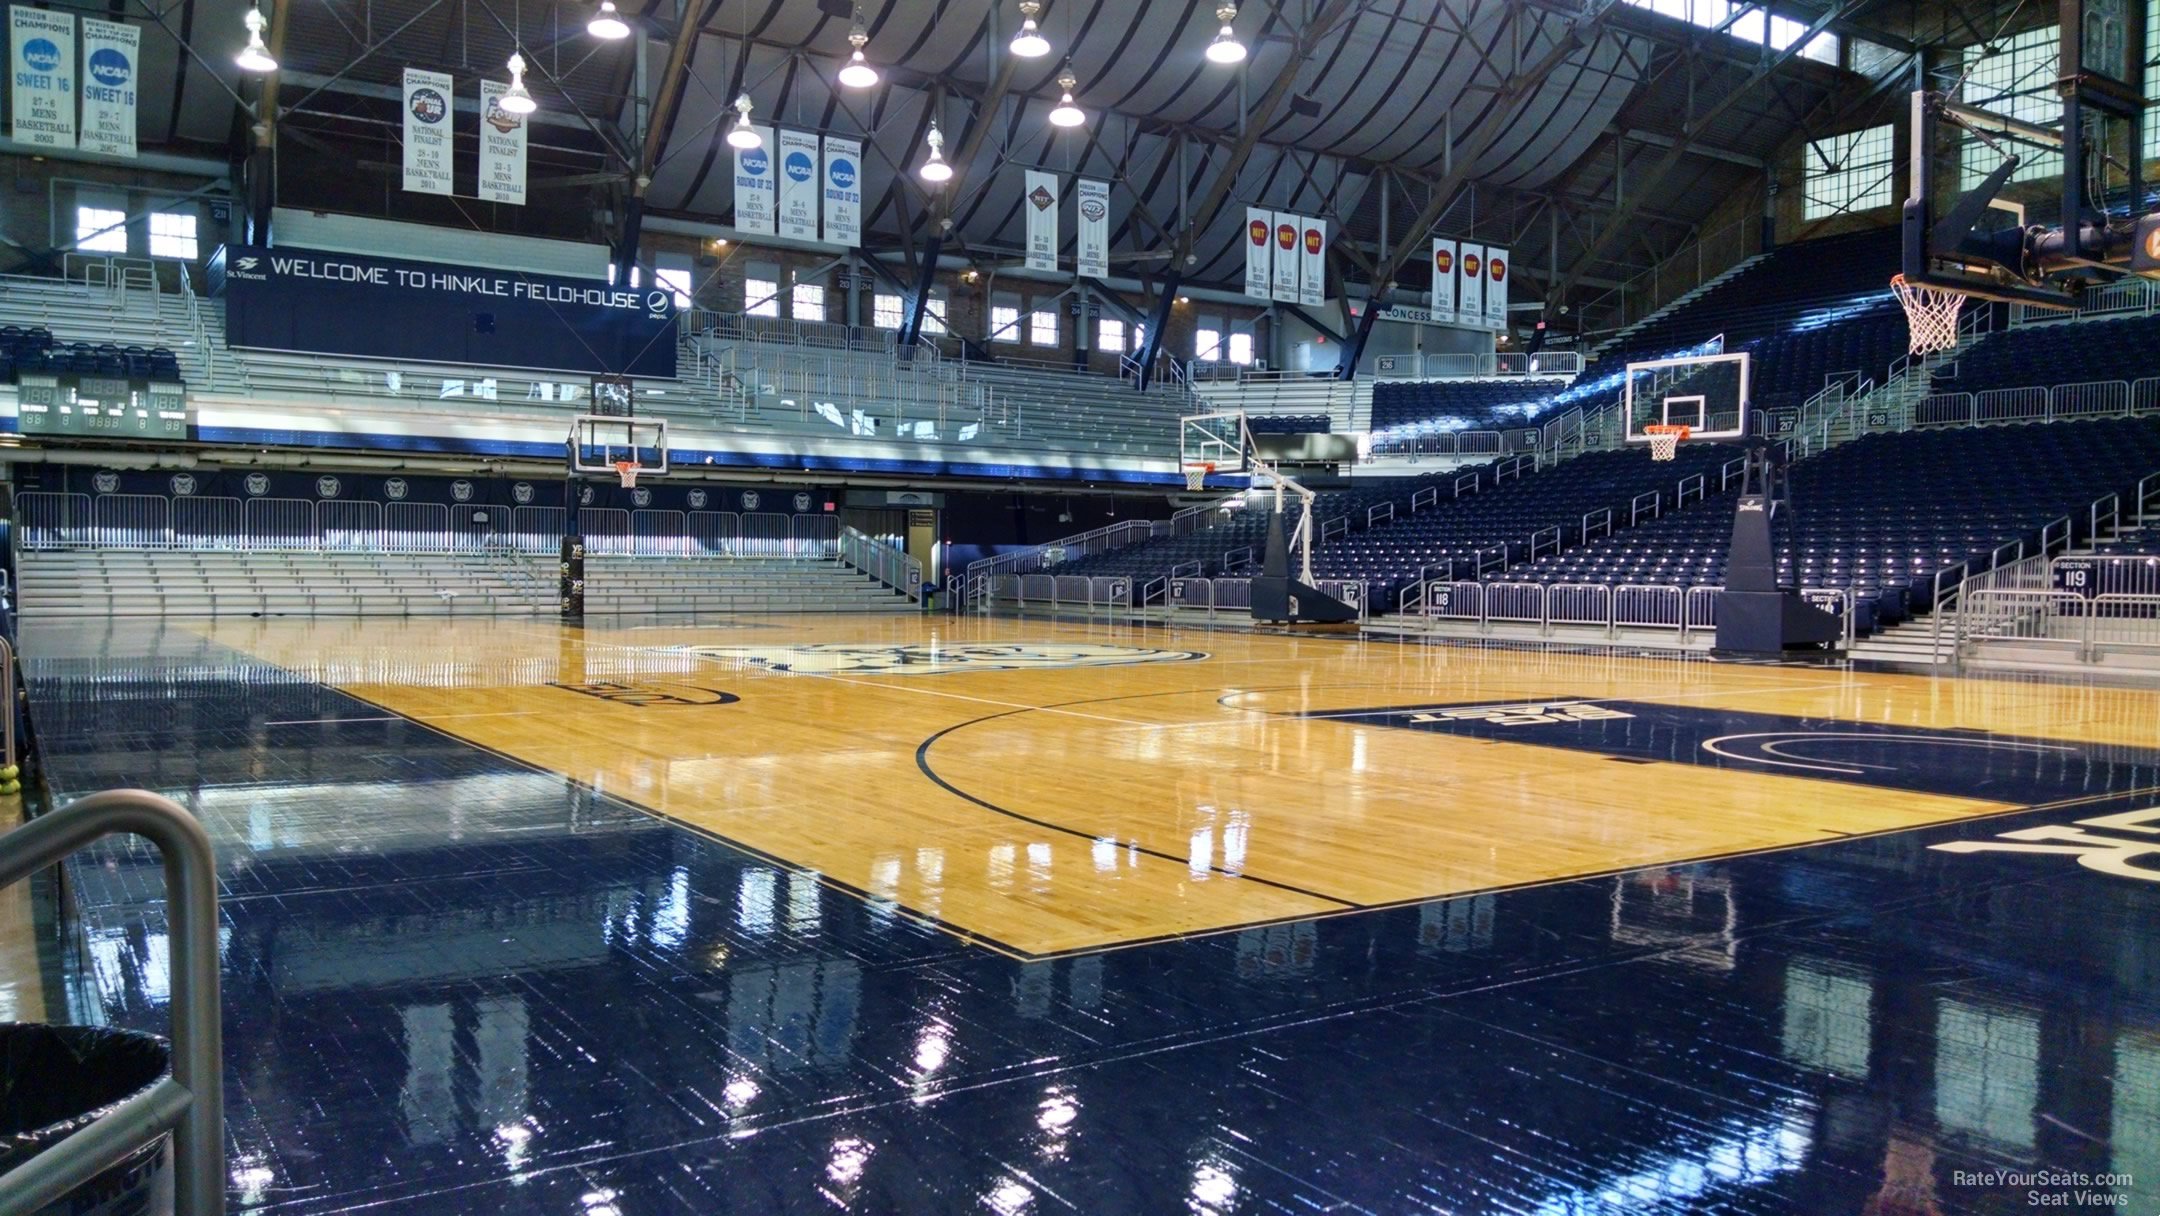 section 124, row 1 seat view  - hinkle fieldhouse